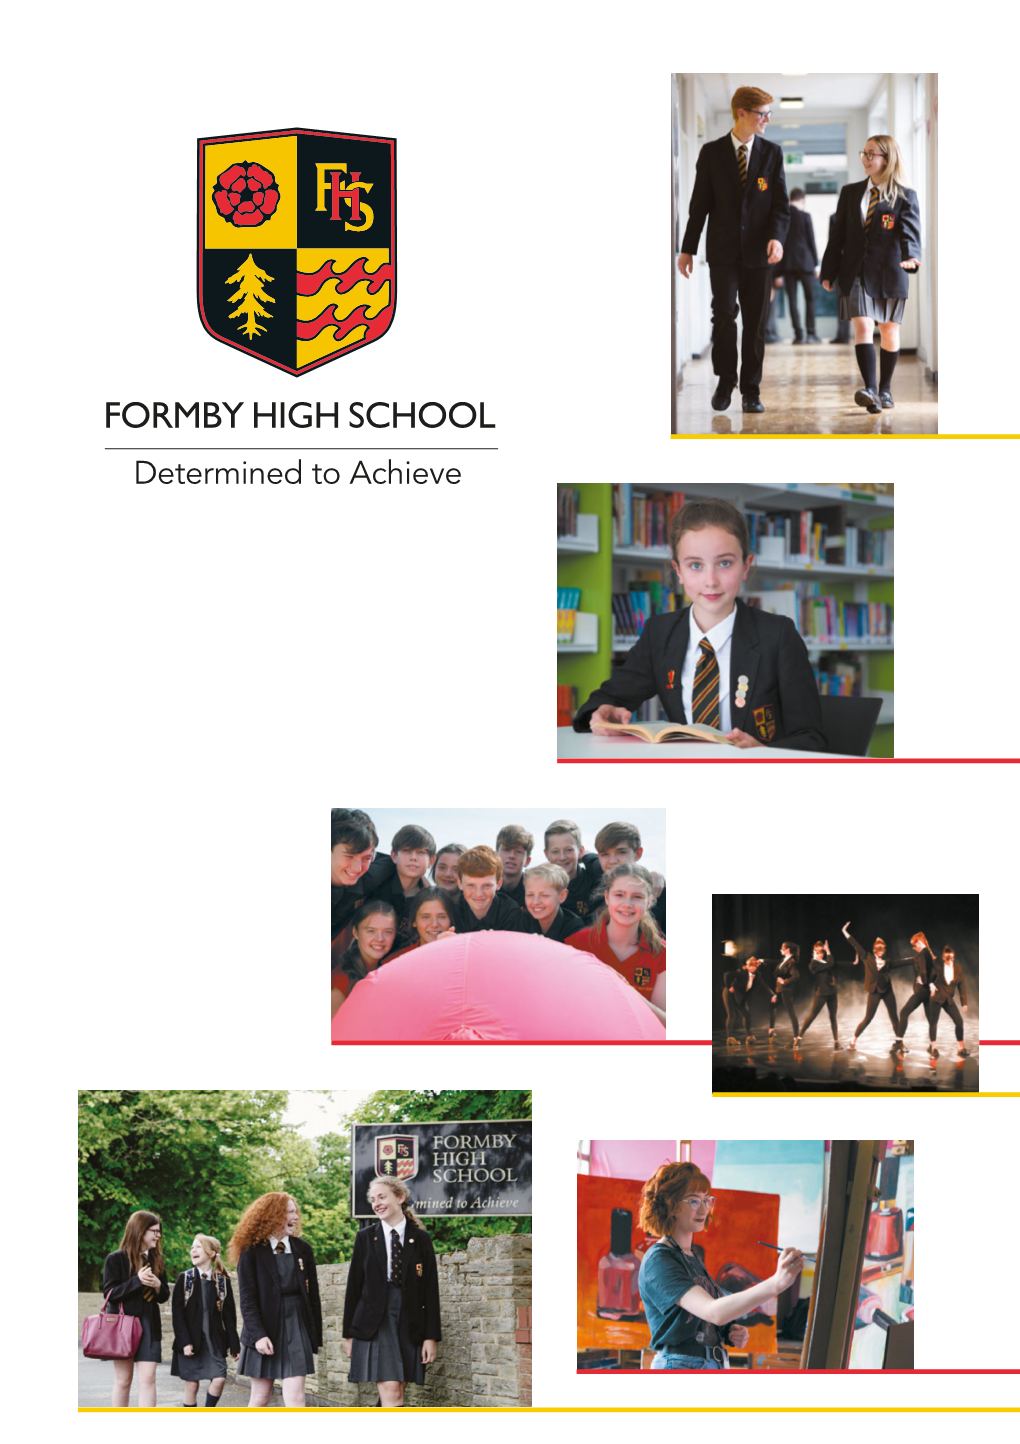 FORMBY HIGH SCHOOL Determined to Achieve MISSION STATEMENT